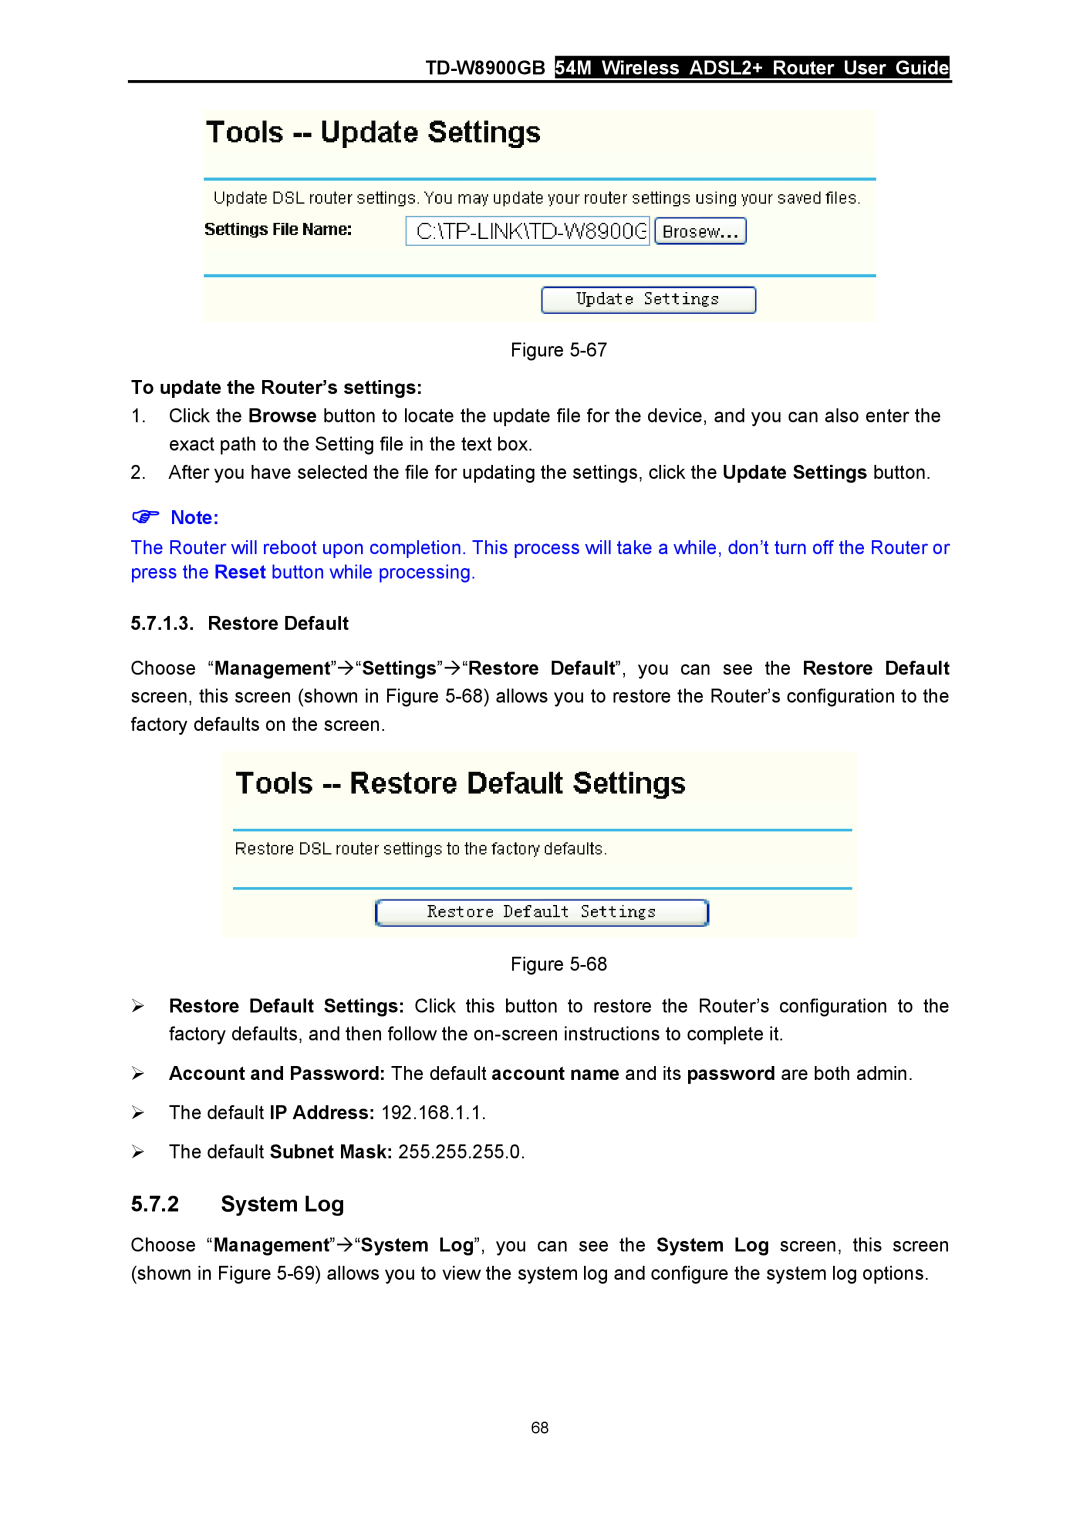 TP-Link System Log, TD-W8900GB 54M Wireless ADSL2+ Router User Guide, To update the Router’s settings, Restore Default 